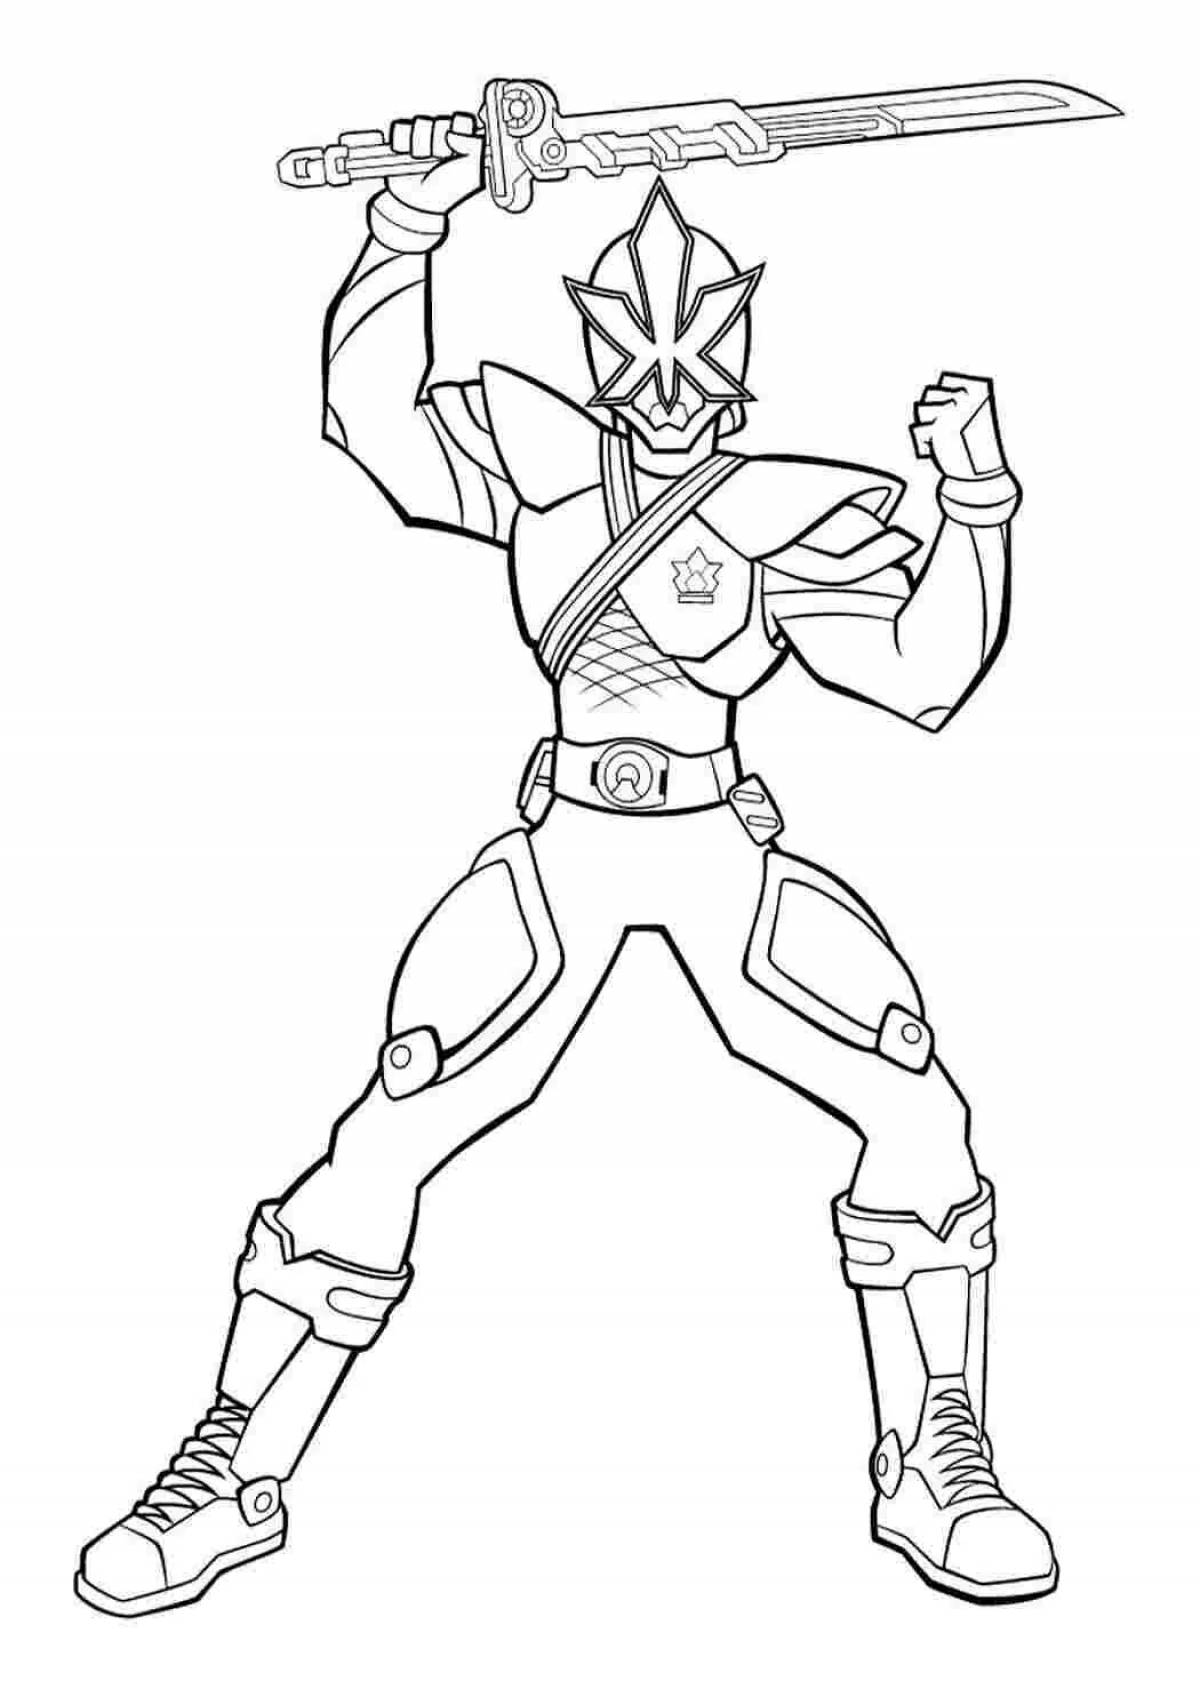 Remarkable Roger Ranger coloring page